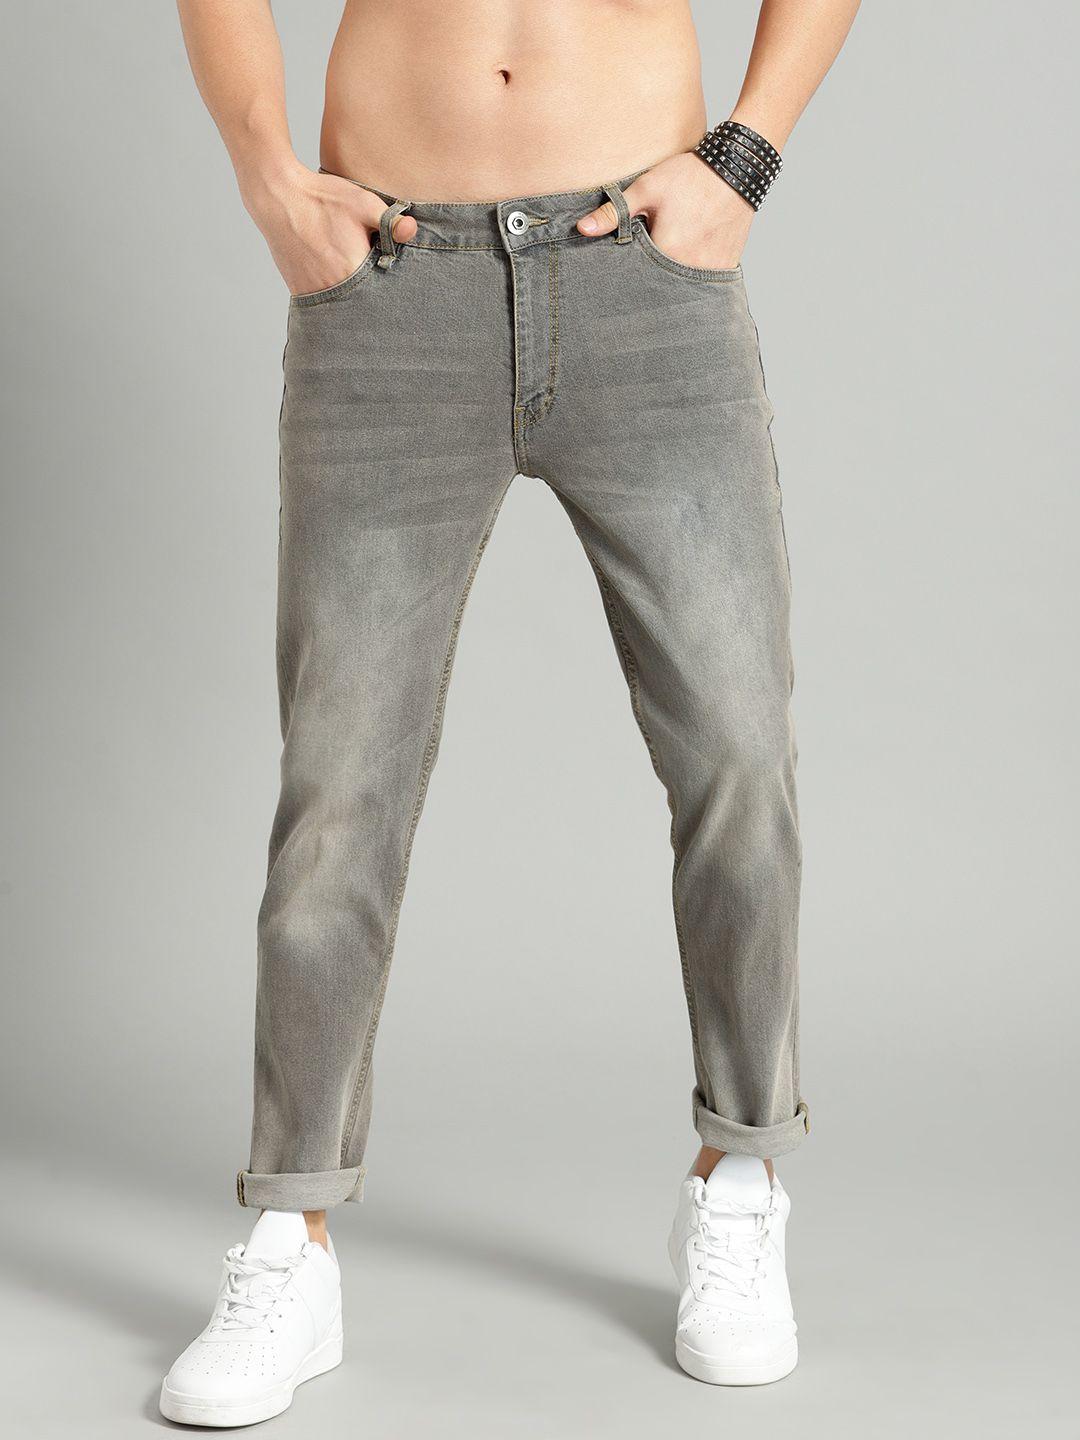 the roadster lifestyle co men grey slim tapered fit mid-rise clean look stretchable jeans